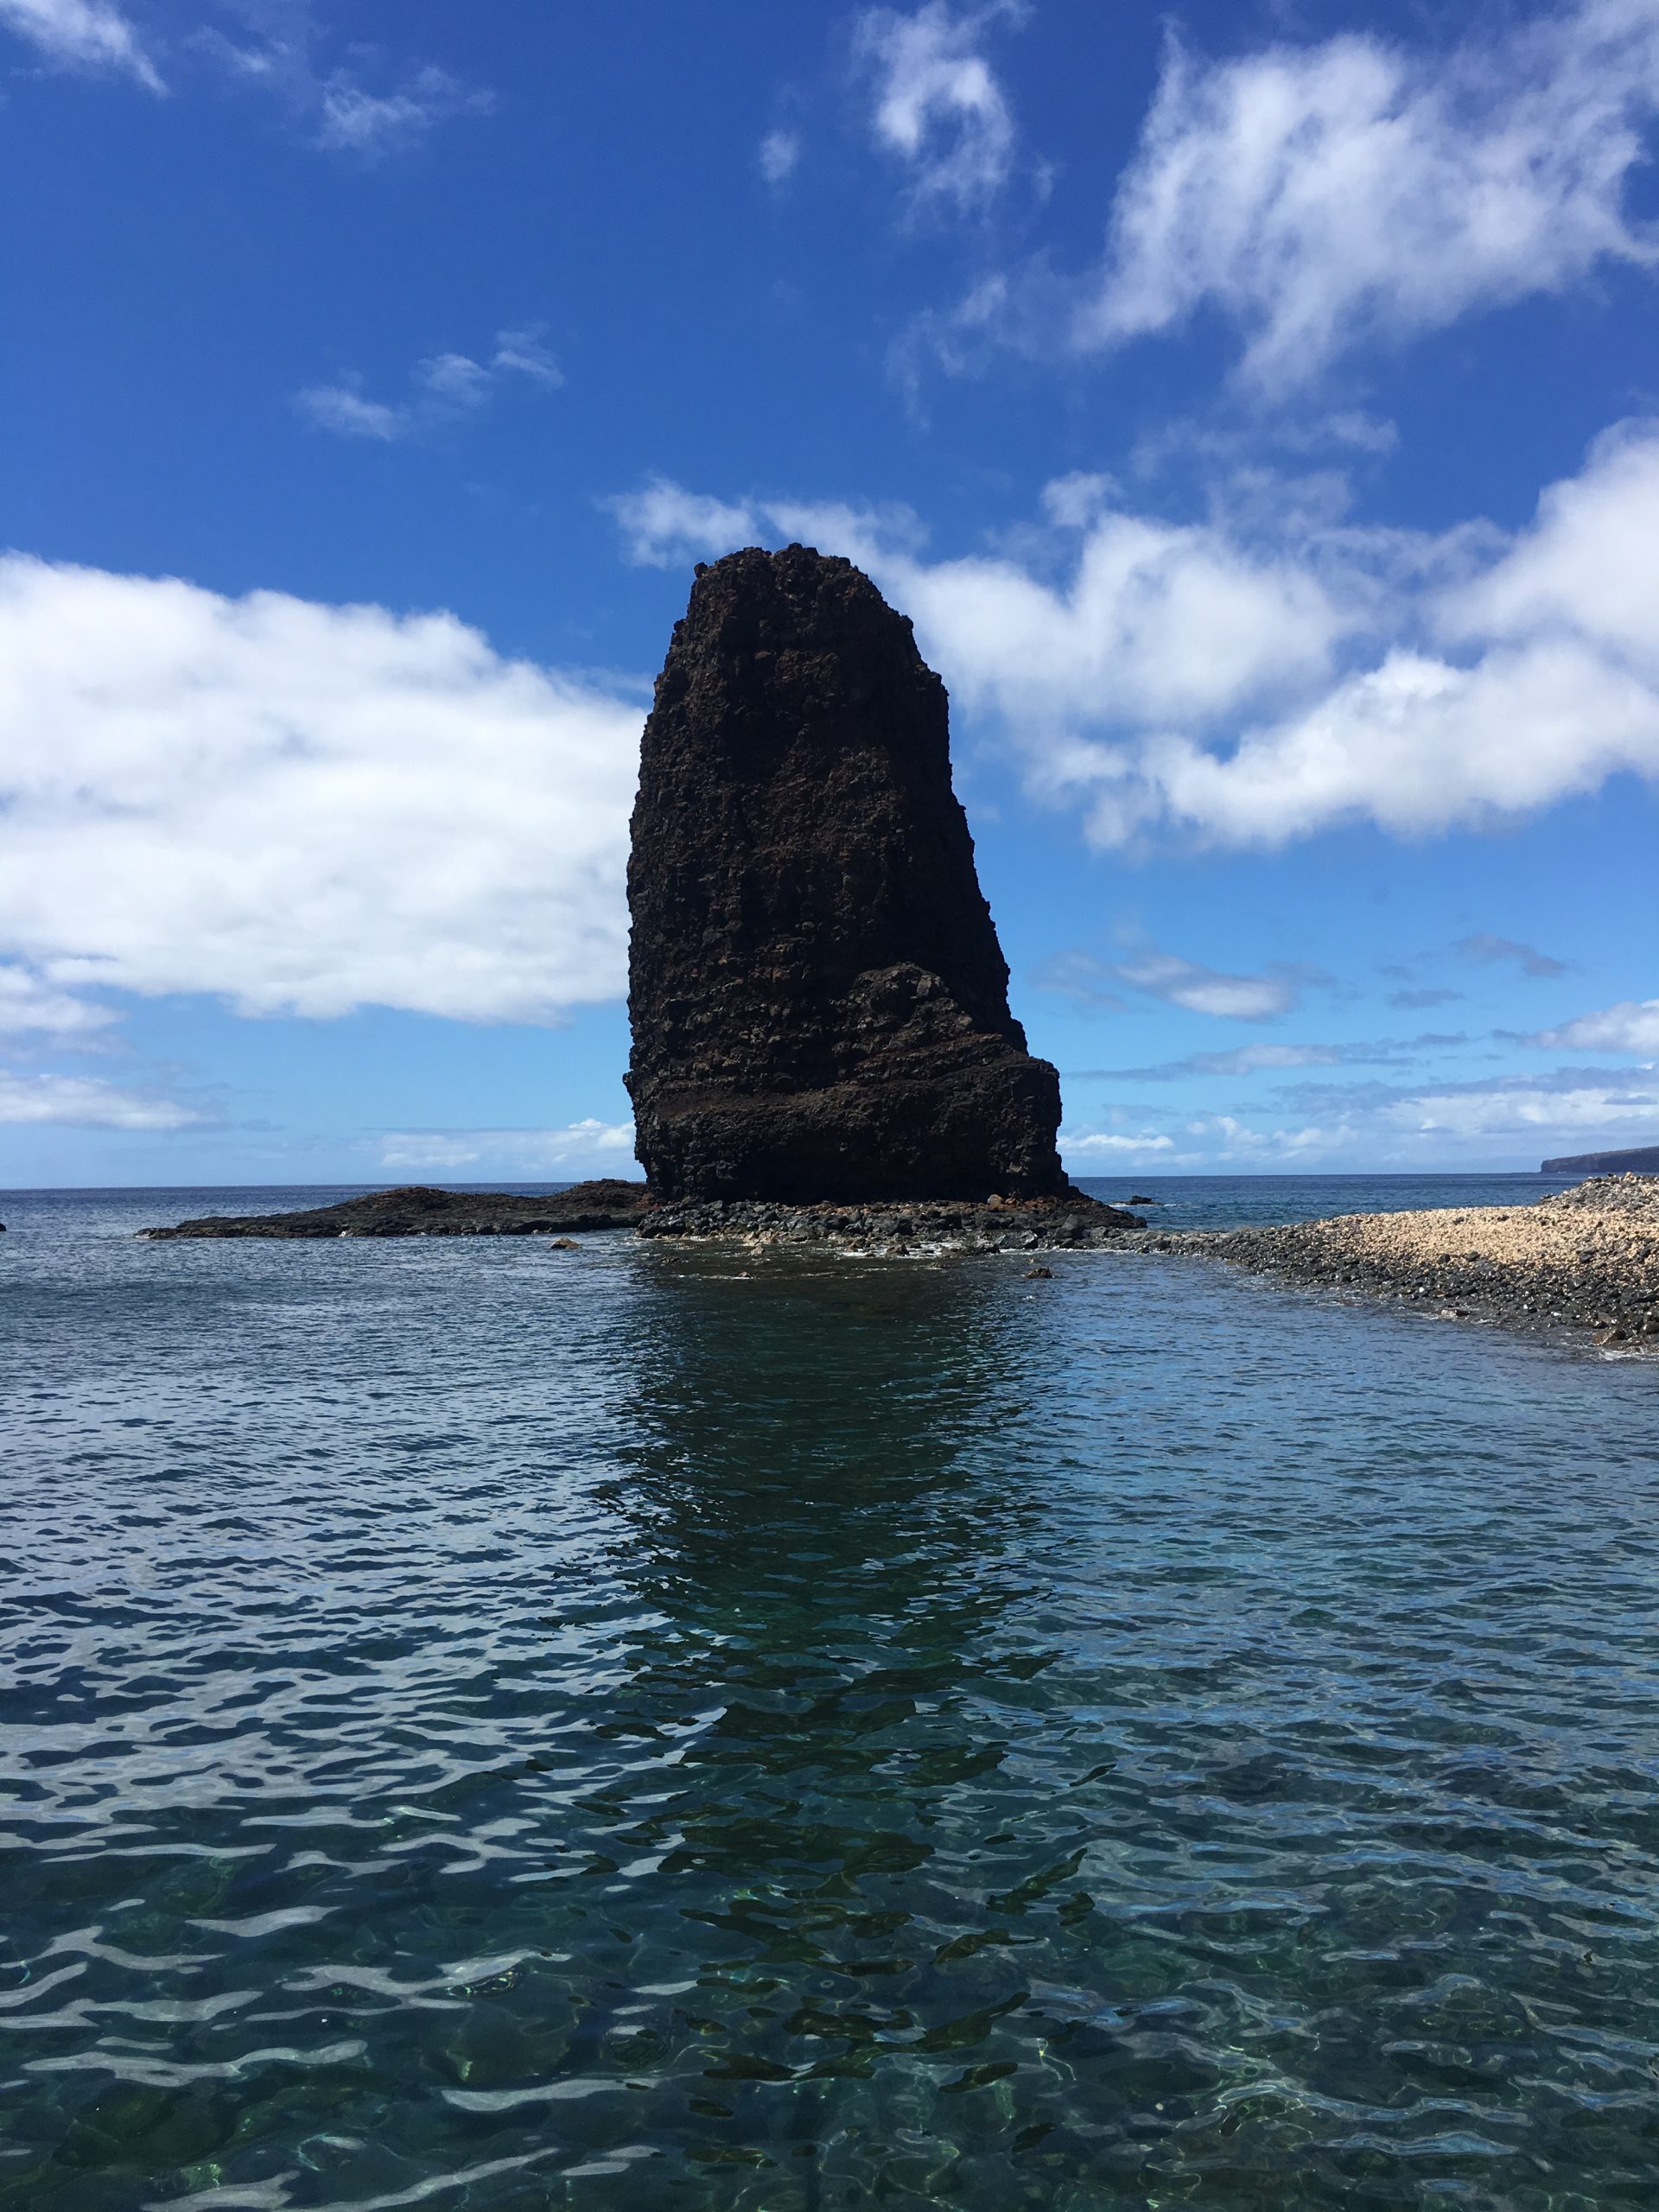 image of the biggest islet from the Nanahoa islets